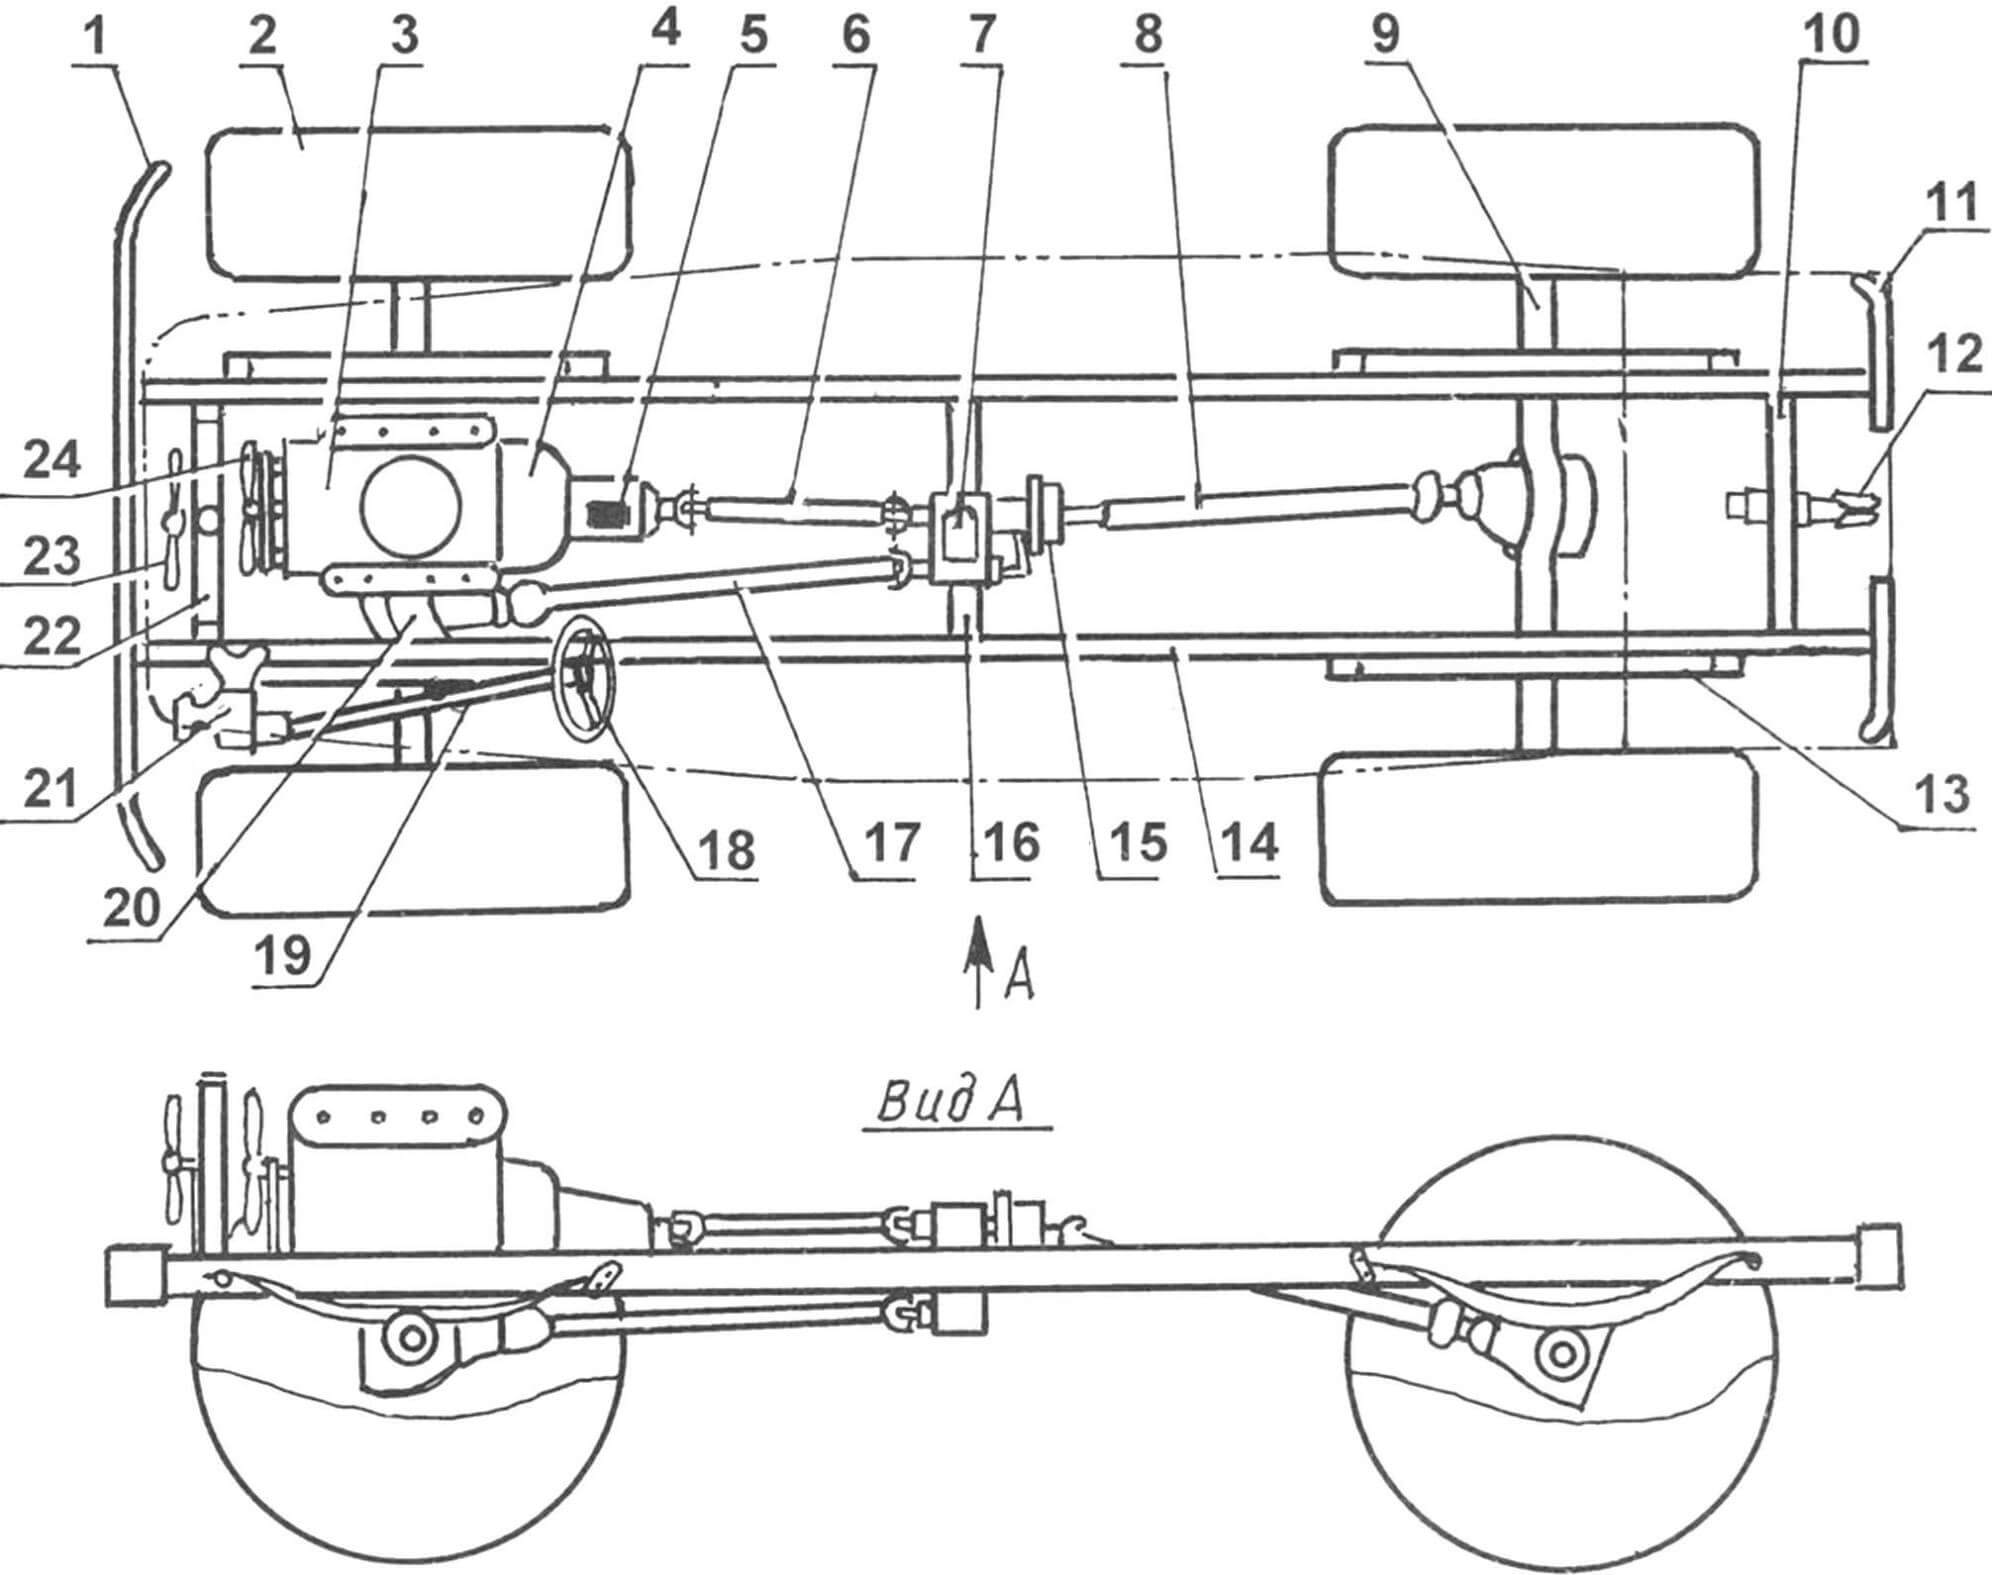 All-terrain vehicle chassis diagram